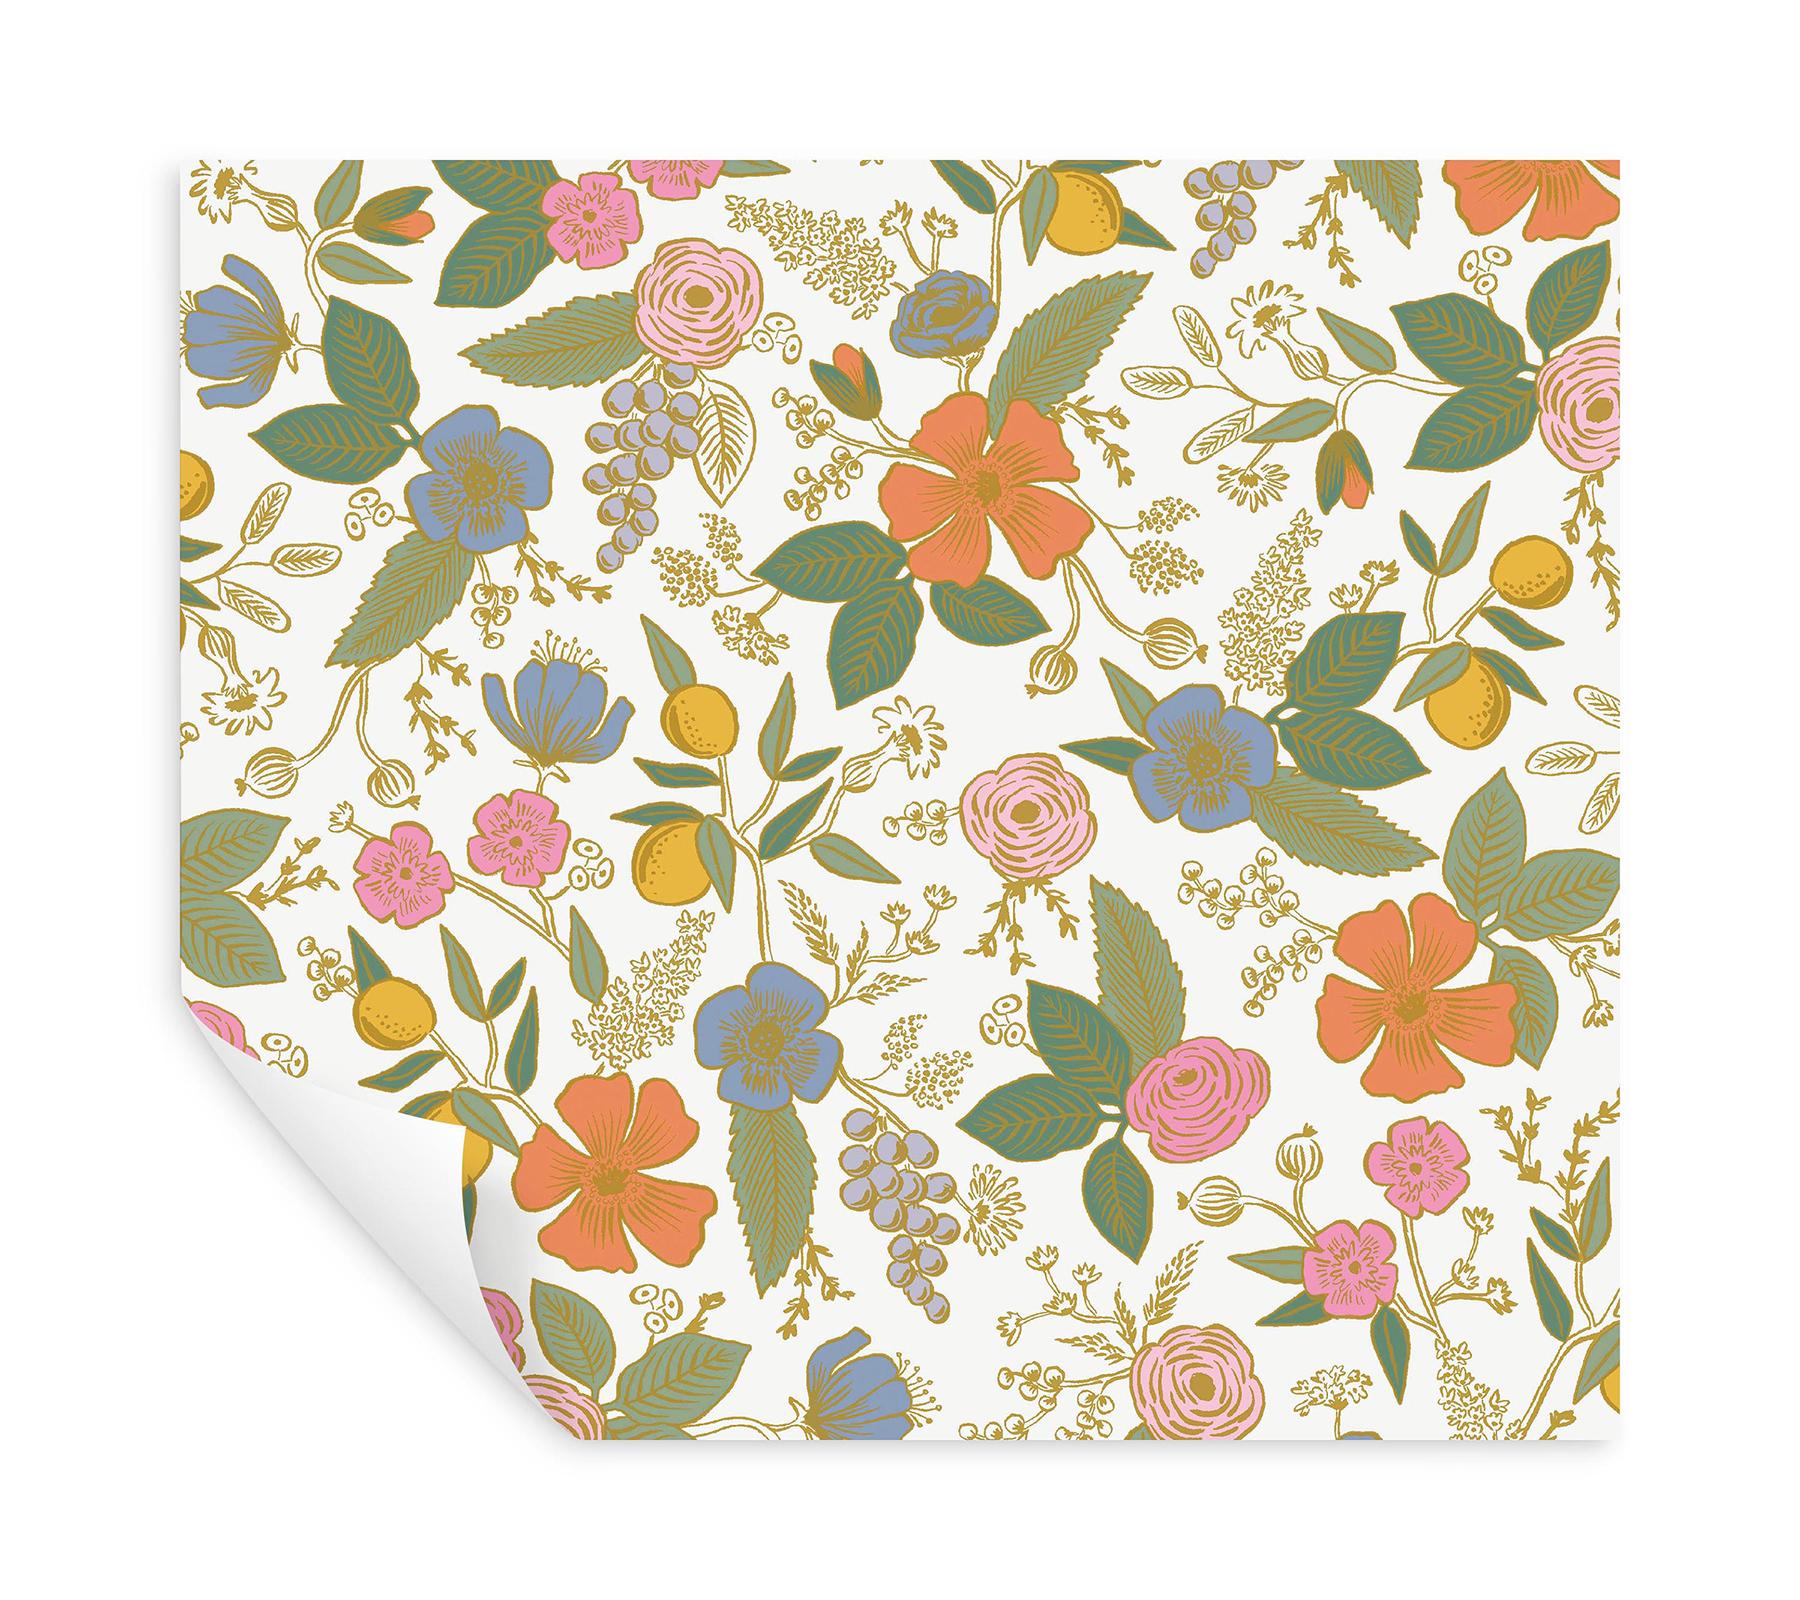 Fabric Stickers Set of 20 Rifle Paper Co Dark Rosa Floral 